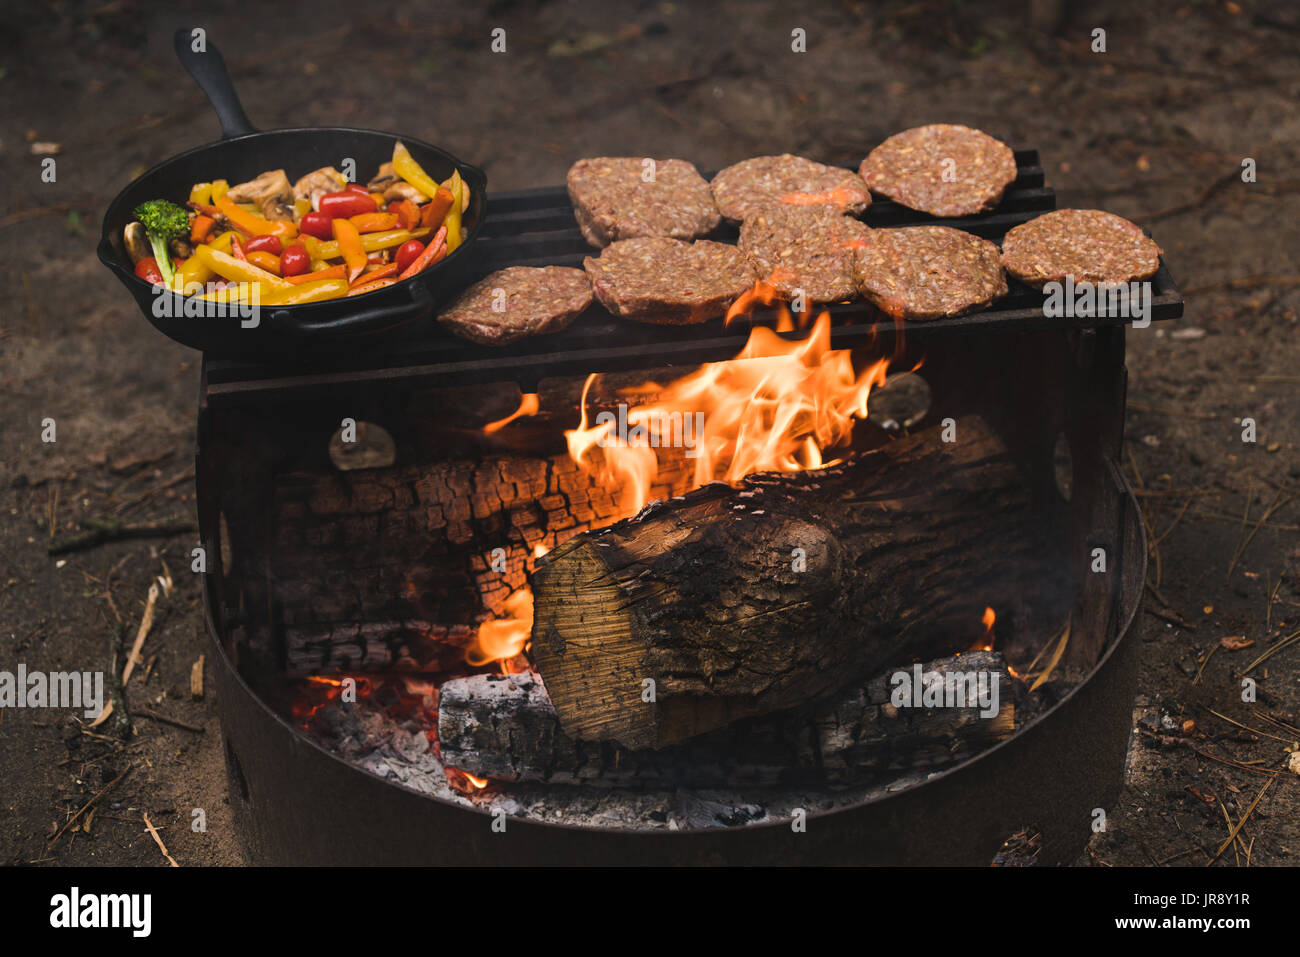 Hamburgers and vegetables cooking on a barbecue on camp fire Stock Photo